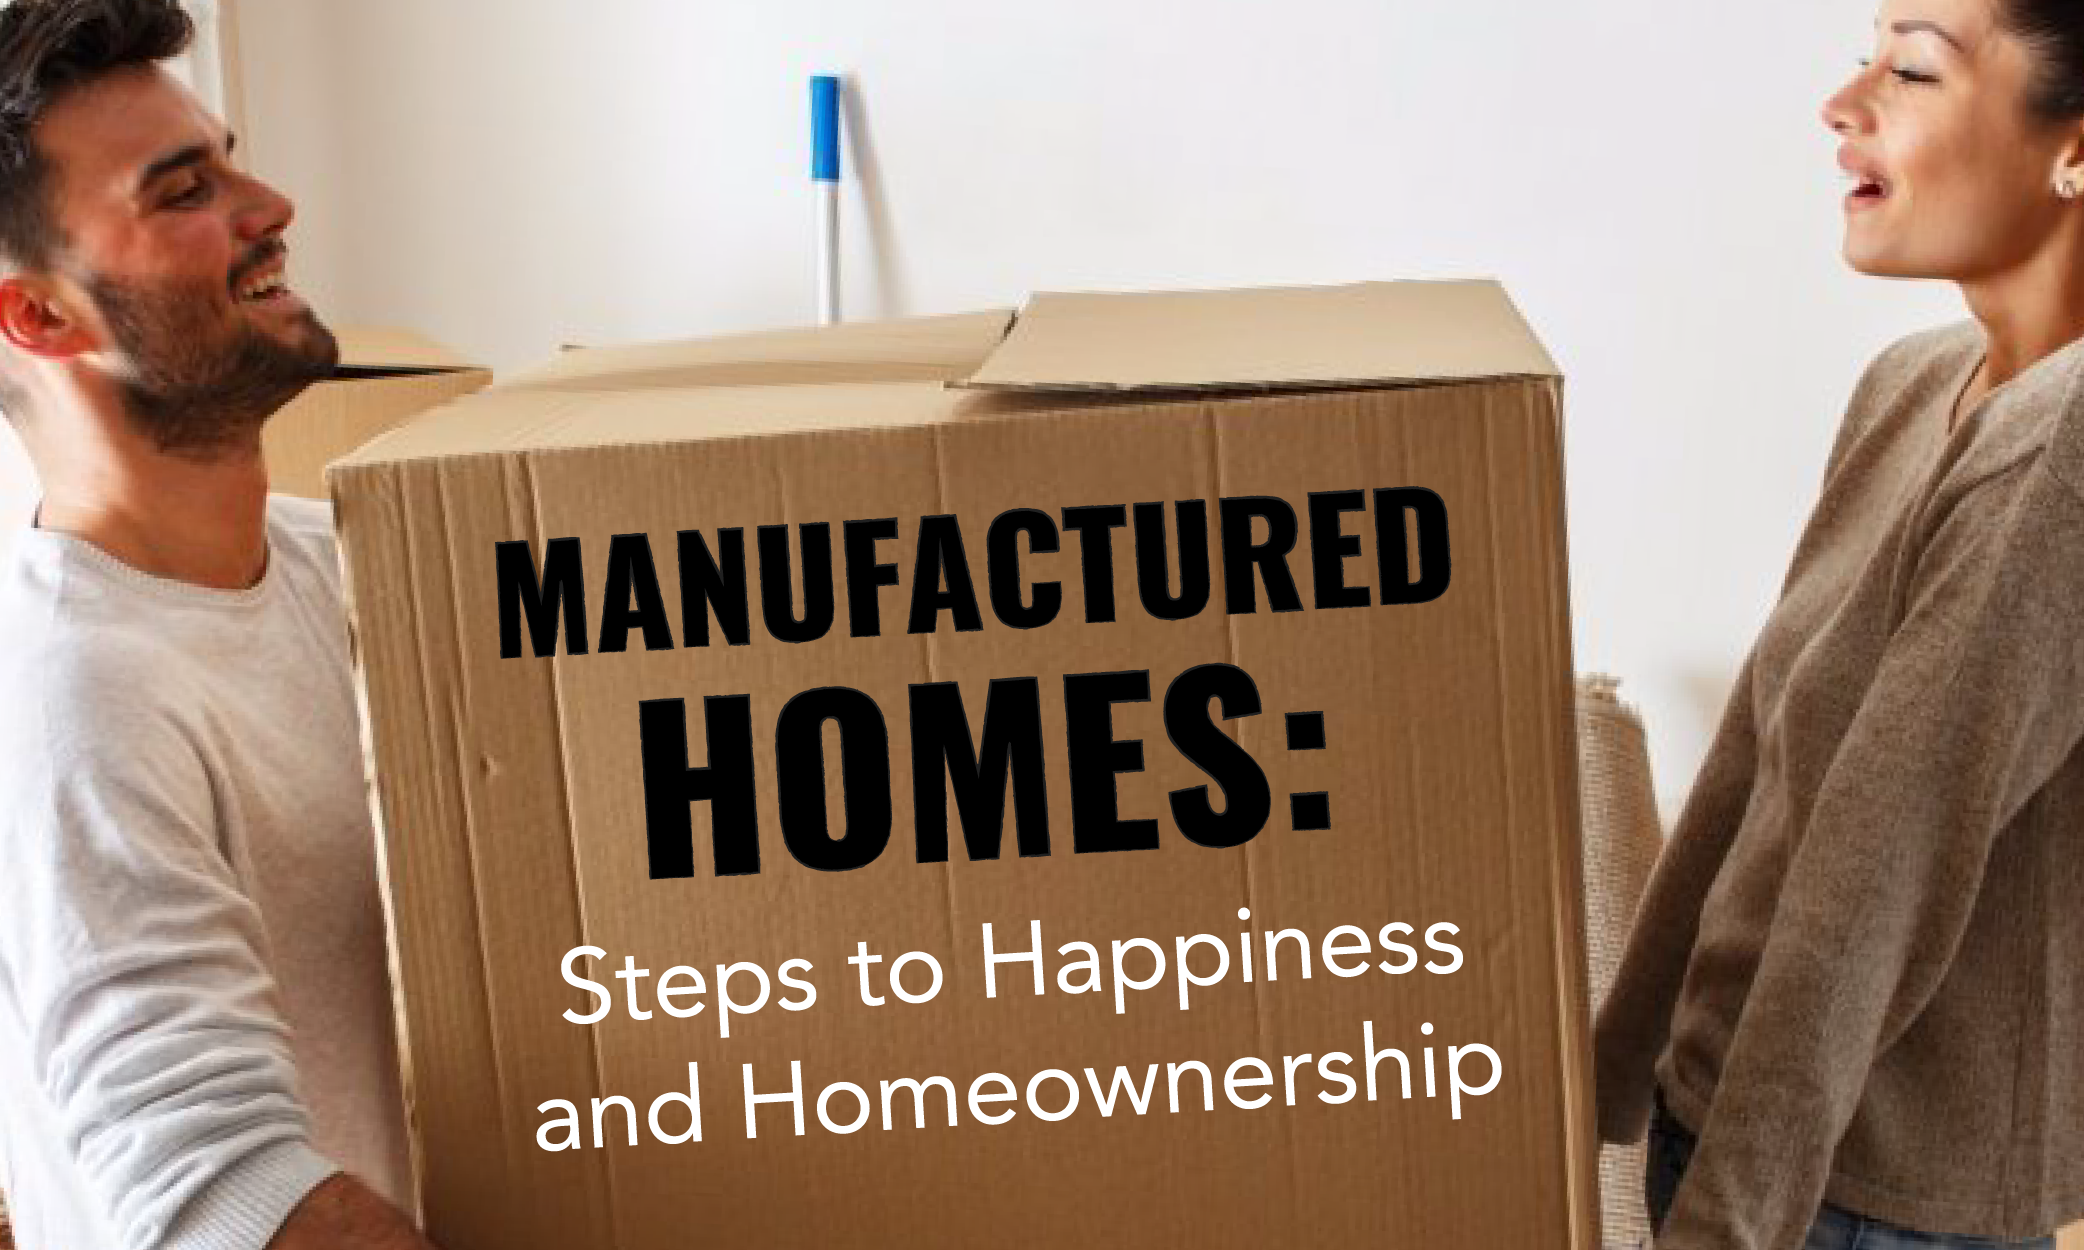 Manufactured Homes - Steps to Happiness and Homeownership